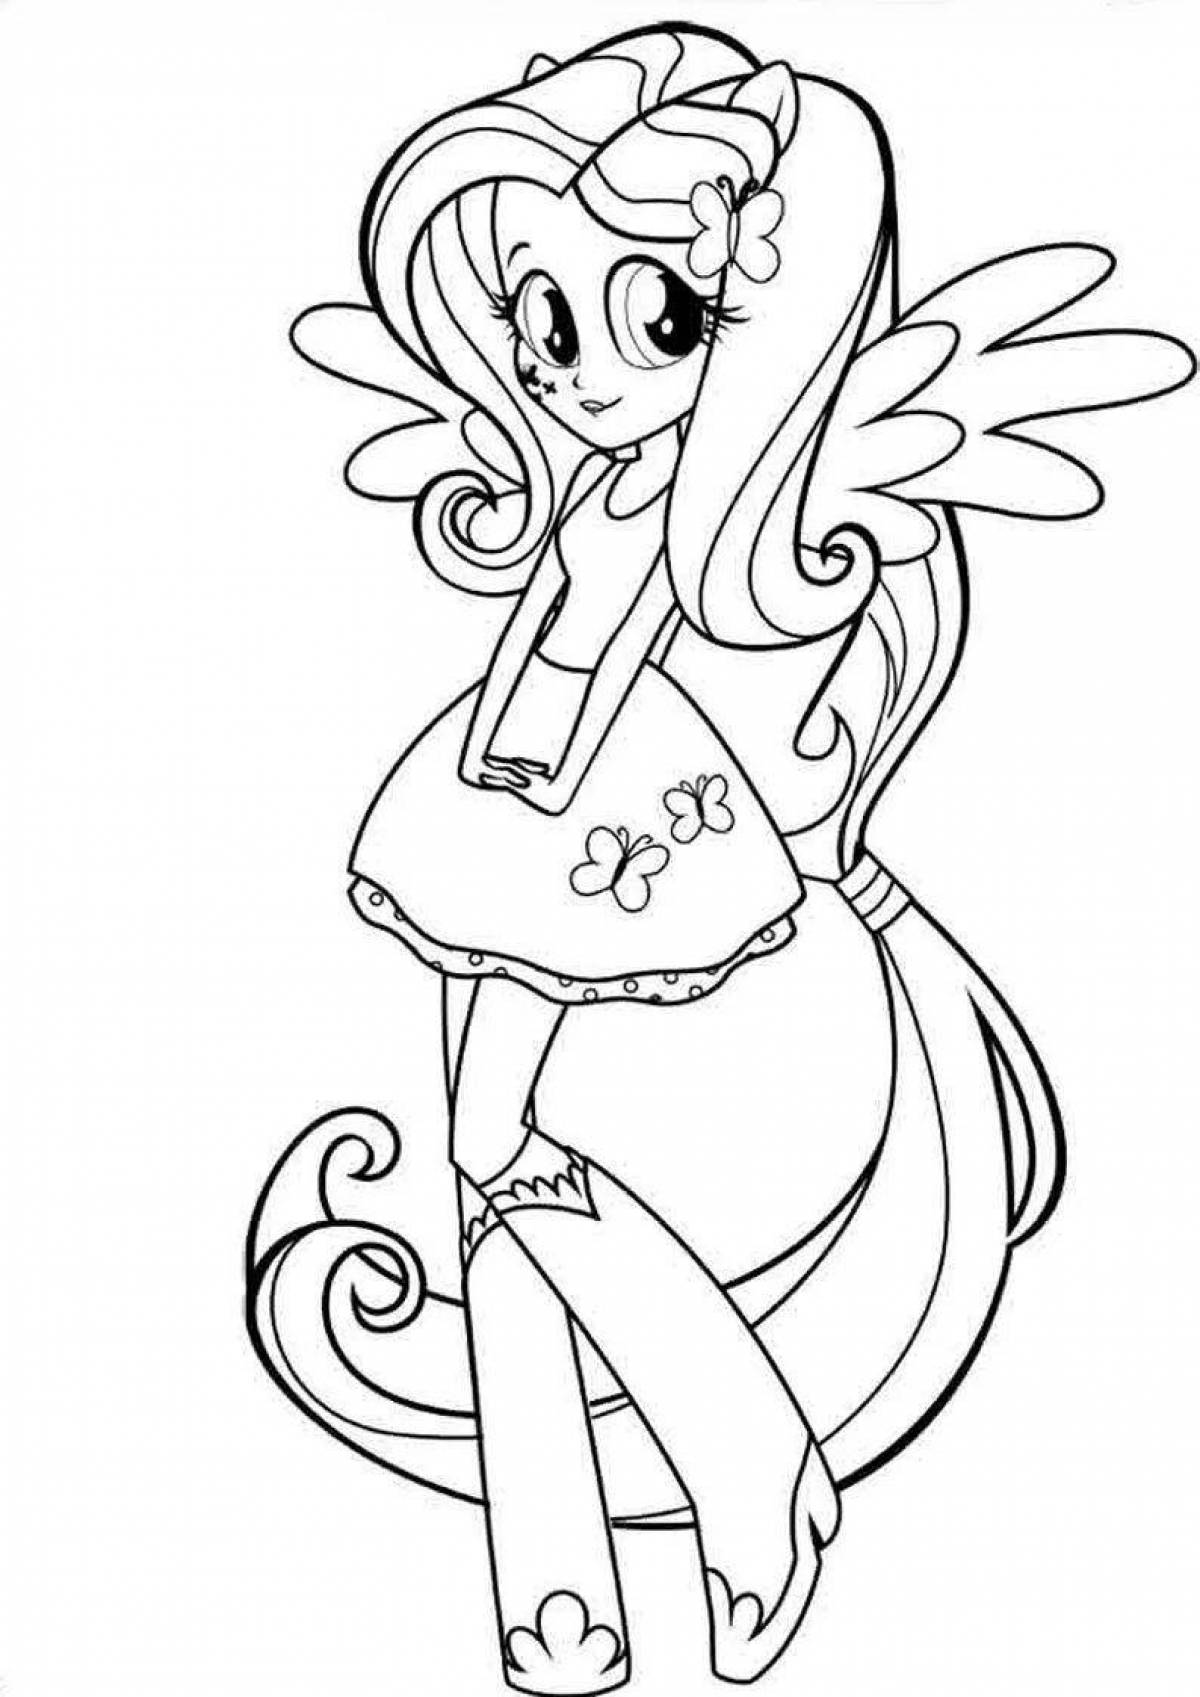 Jovial equestria girls coloring page